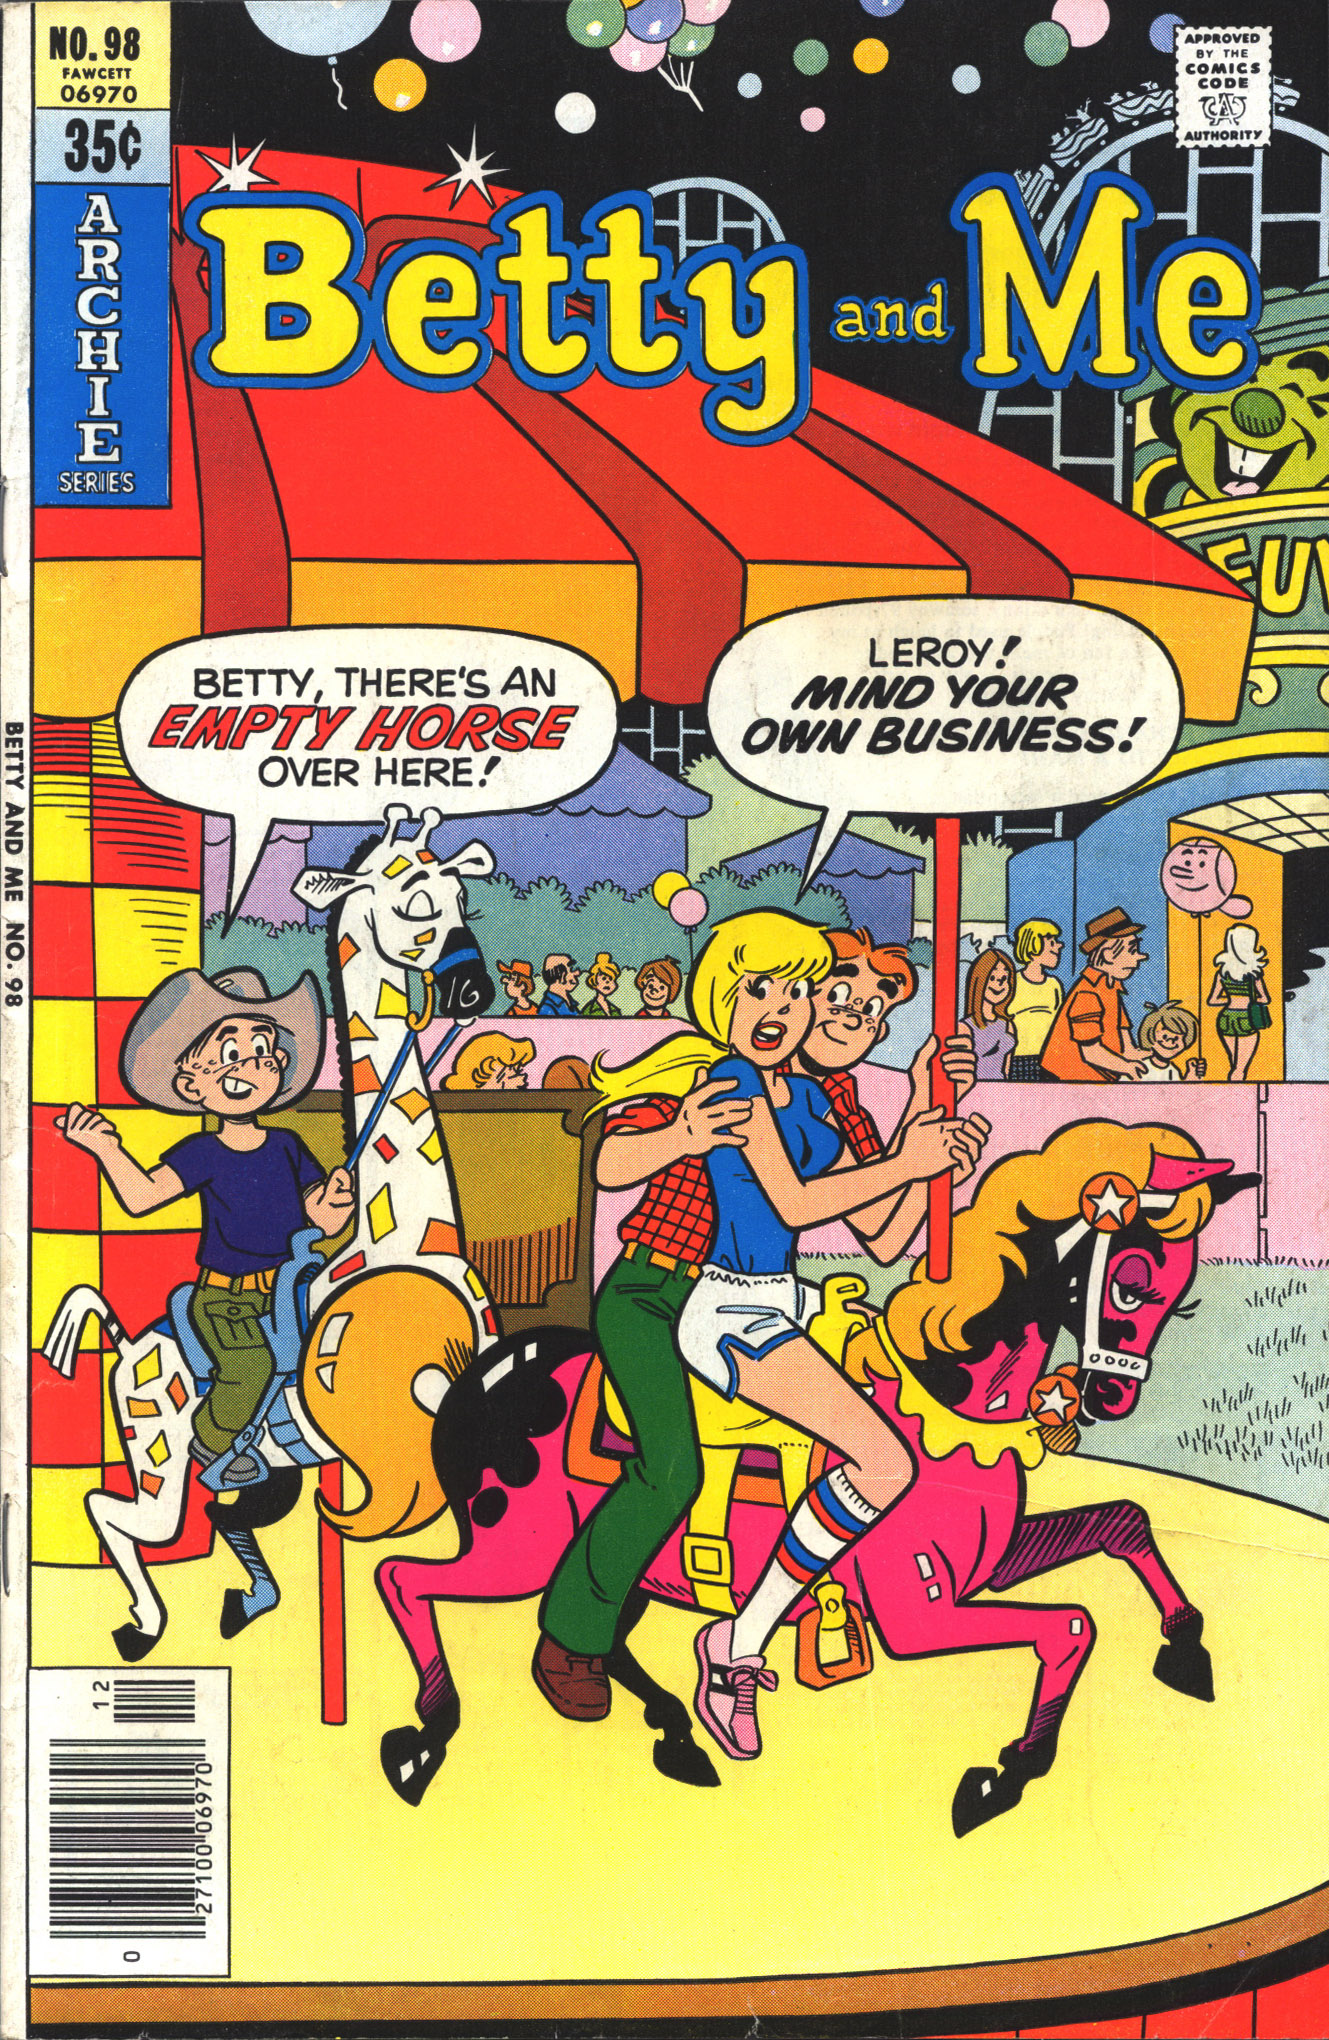 Read online Betty and Me comic -  Issue #98 - 1